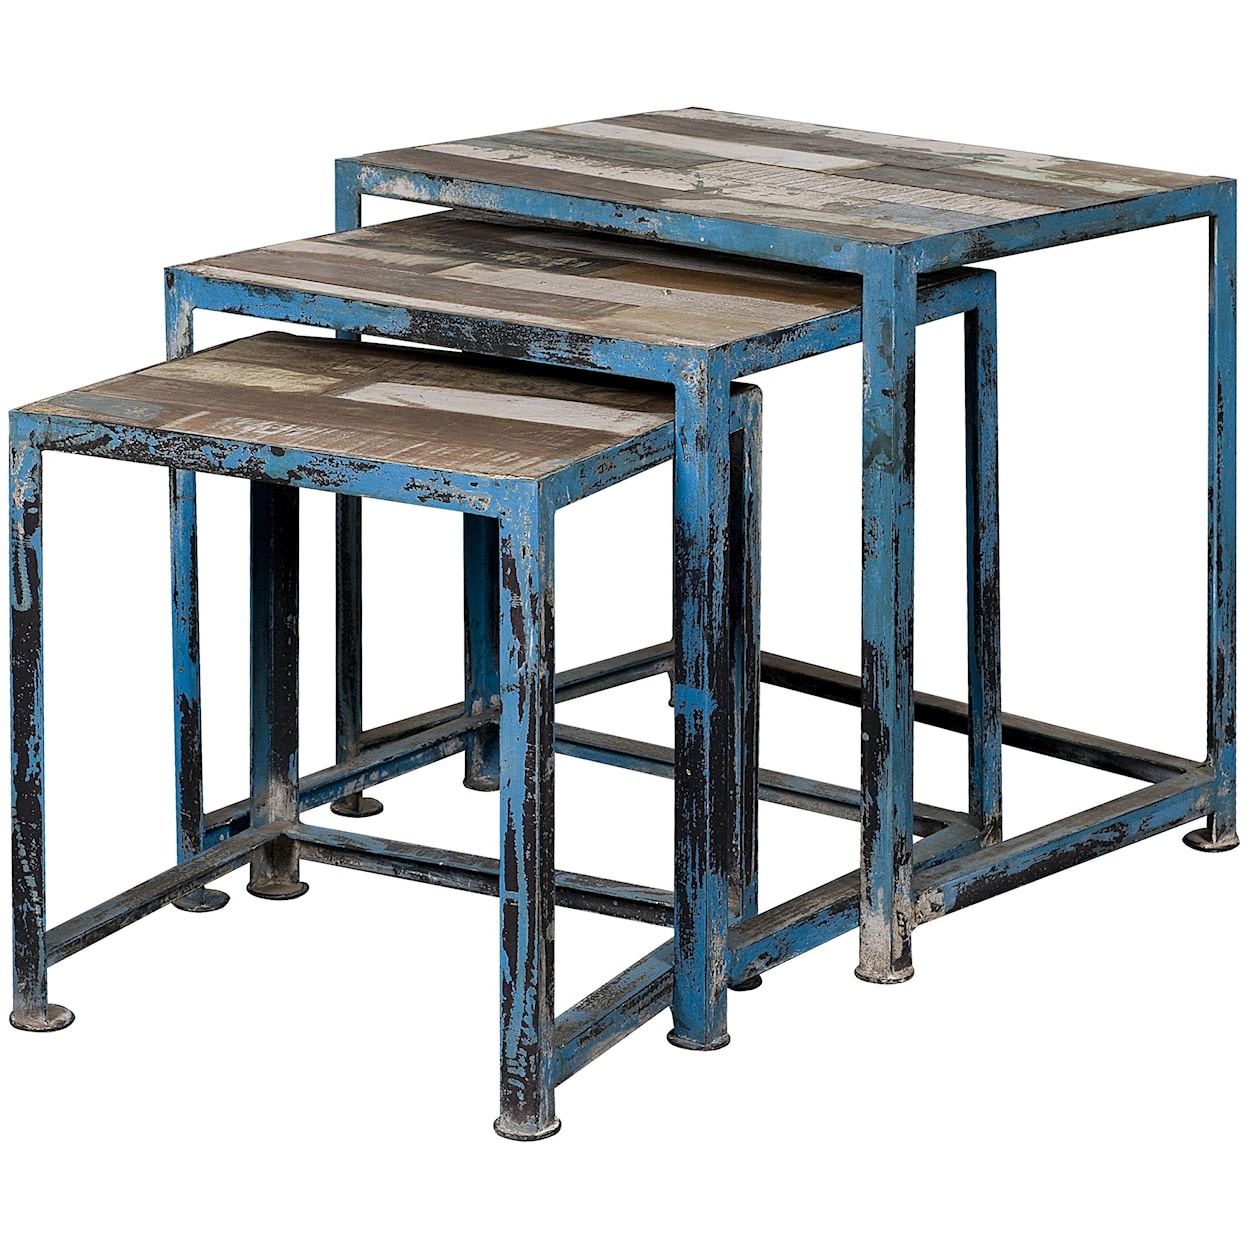 Coast2Coast Home Occasional Accents Set of Three Nesting Tables - Reclaimed